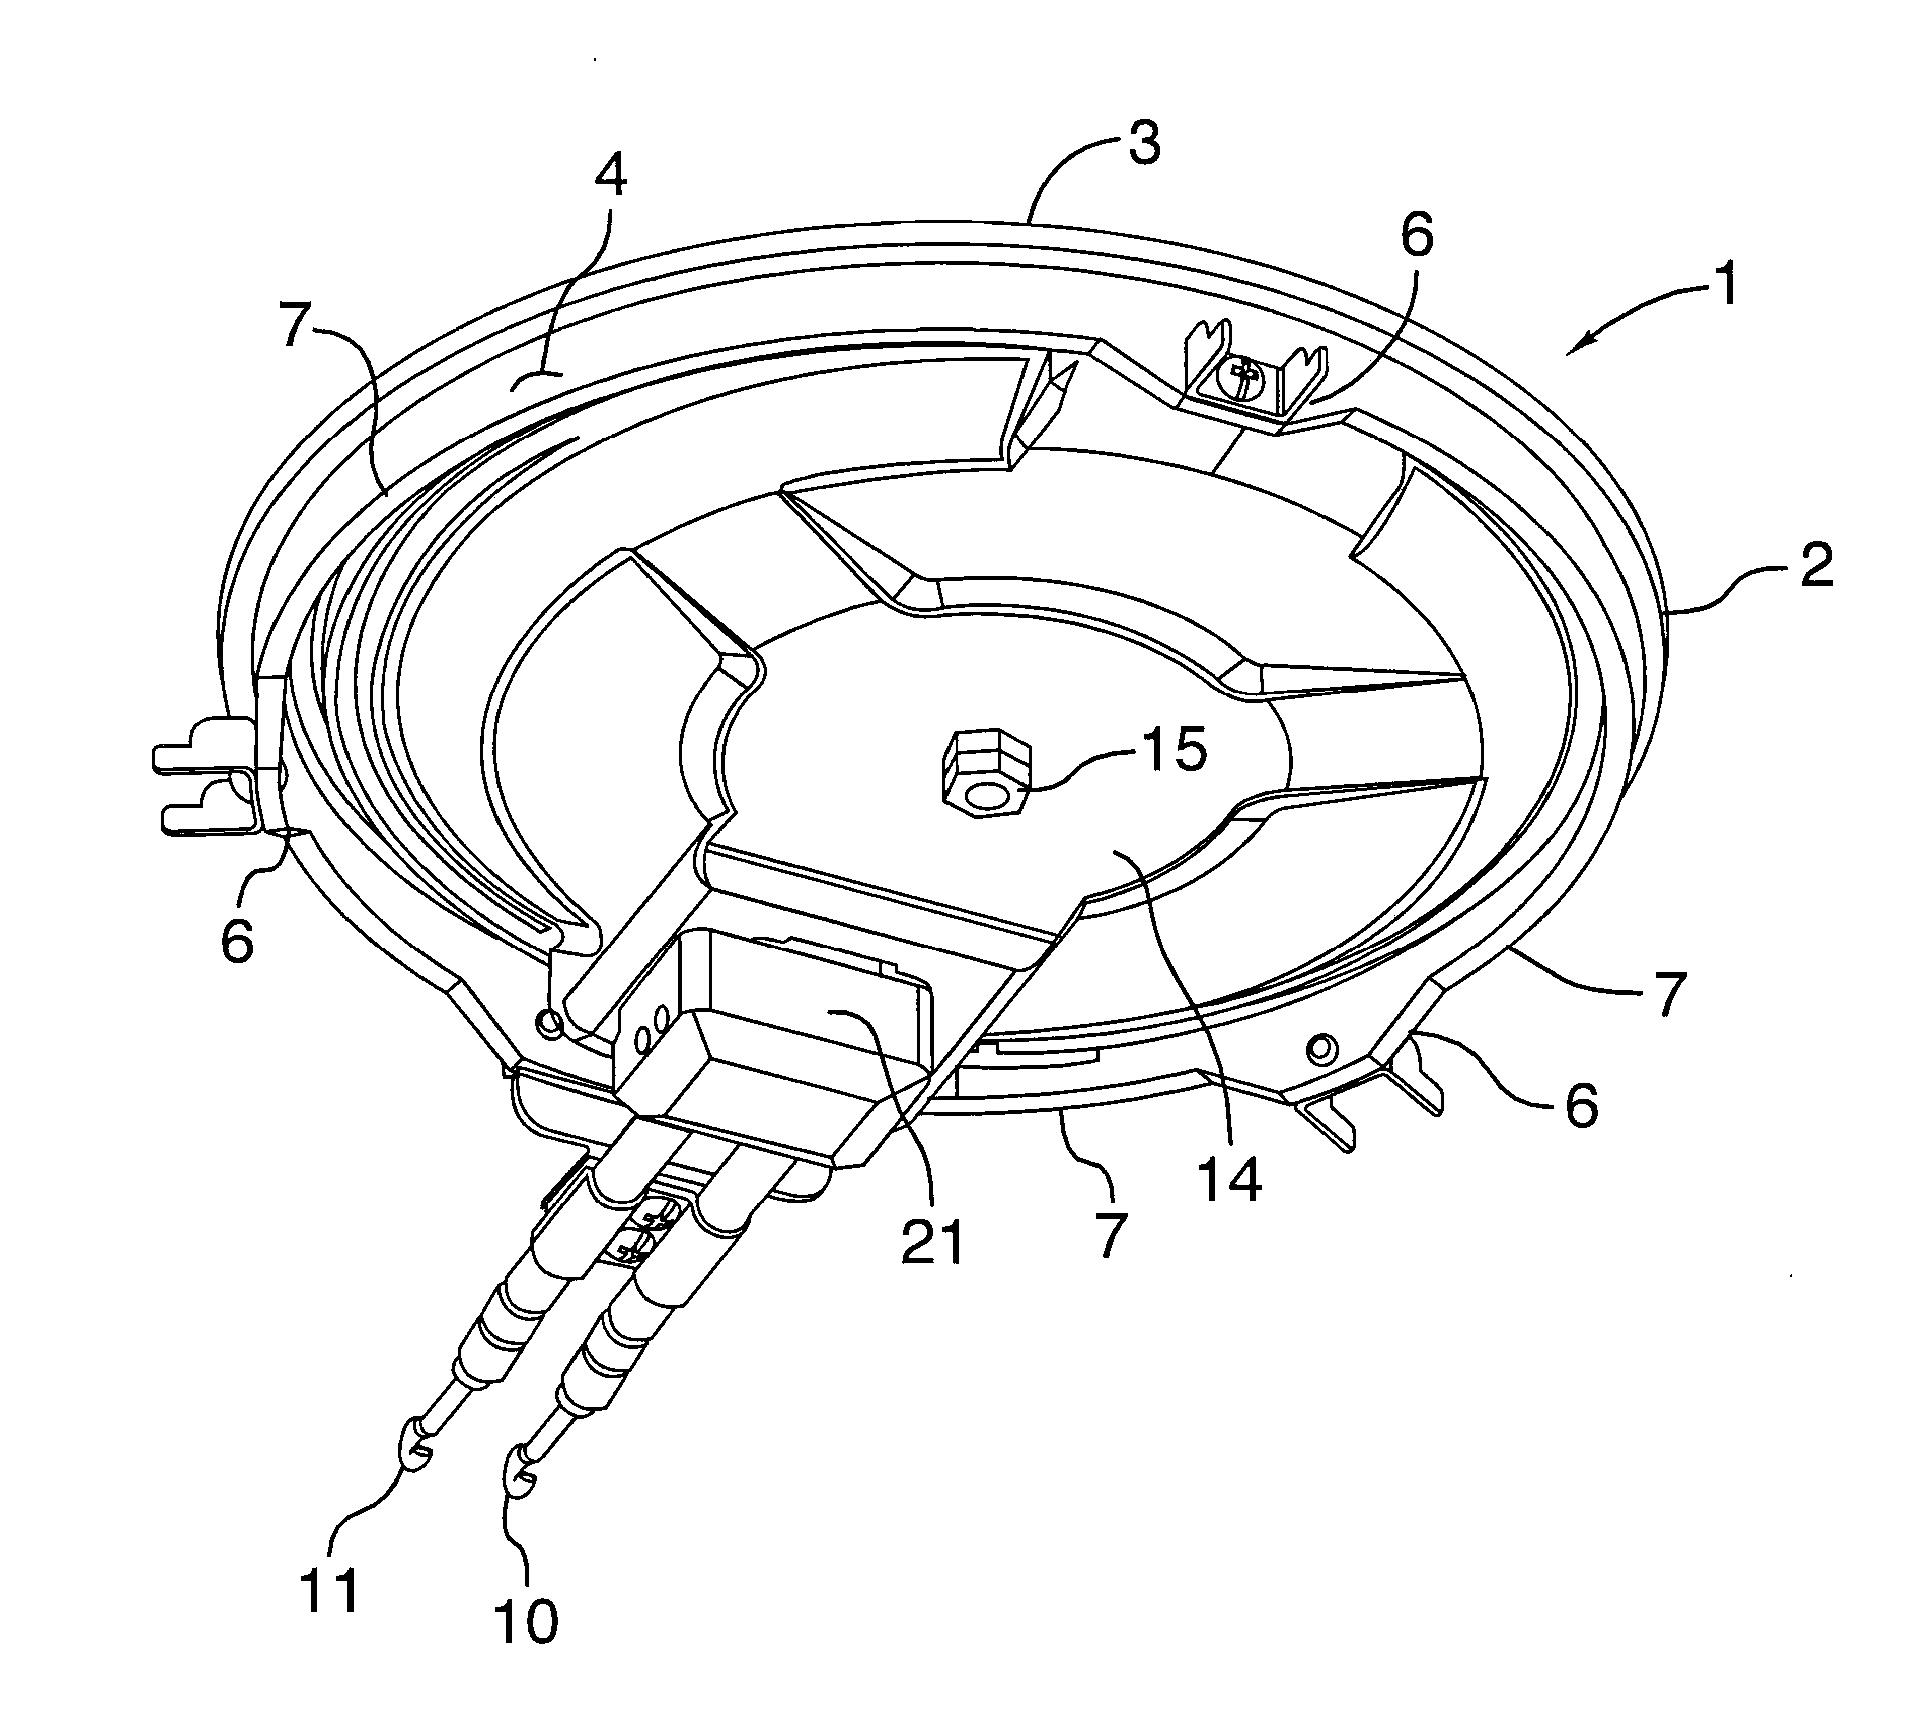 Temperature controlled/limiting heating element for an electric cooking appliance